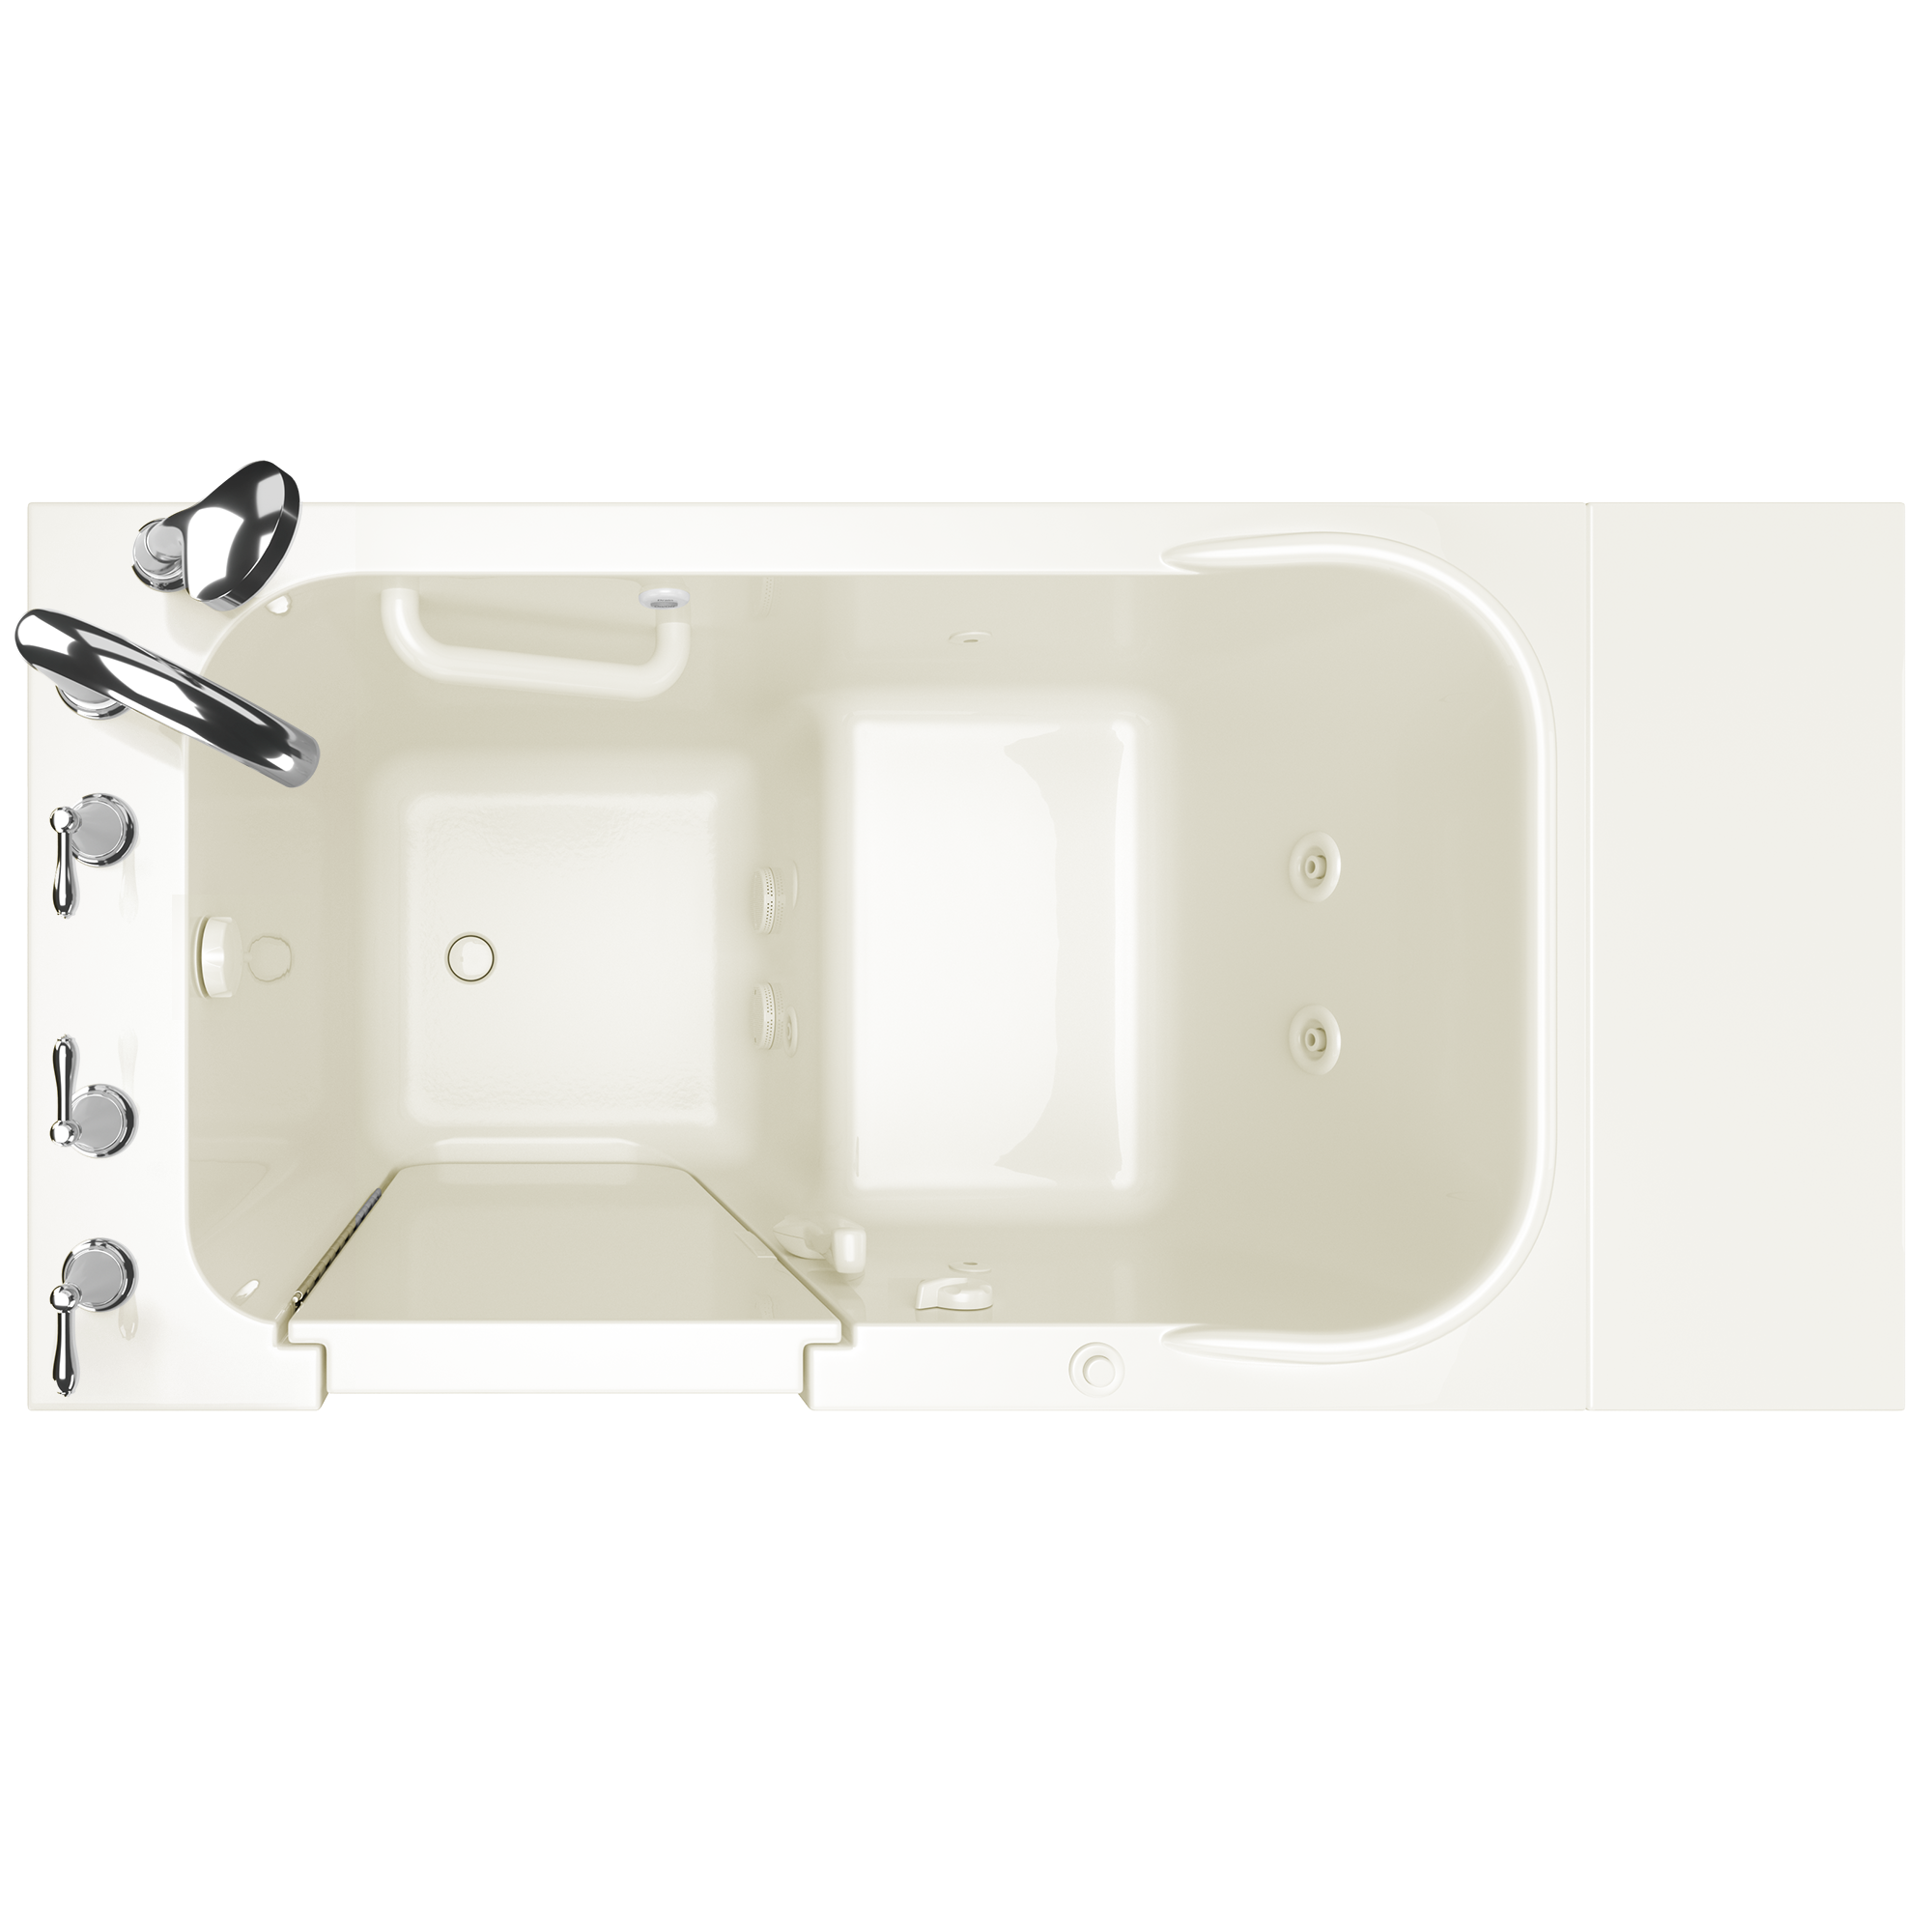 Gelcoat Value Series 28 x 48-Inch Walk-in Tub With Whirlpool System - Left-Hand Drain With Faucet